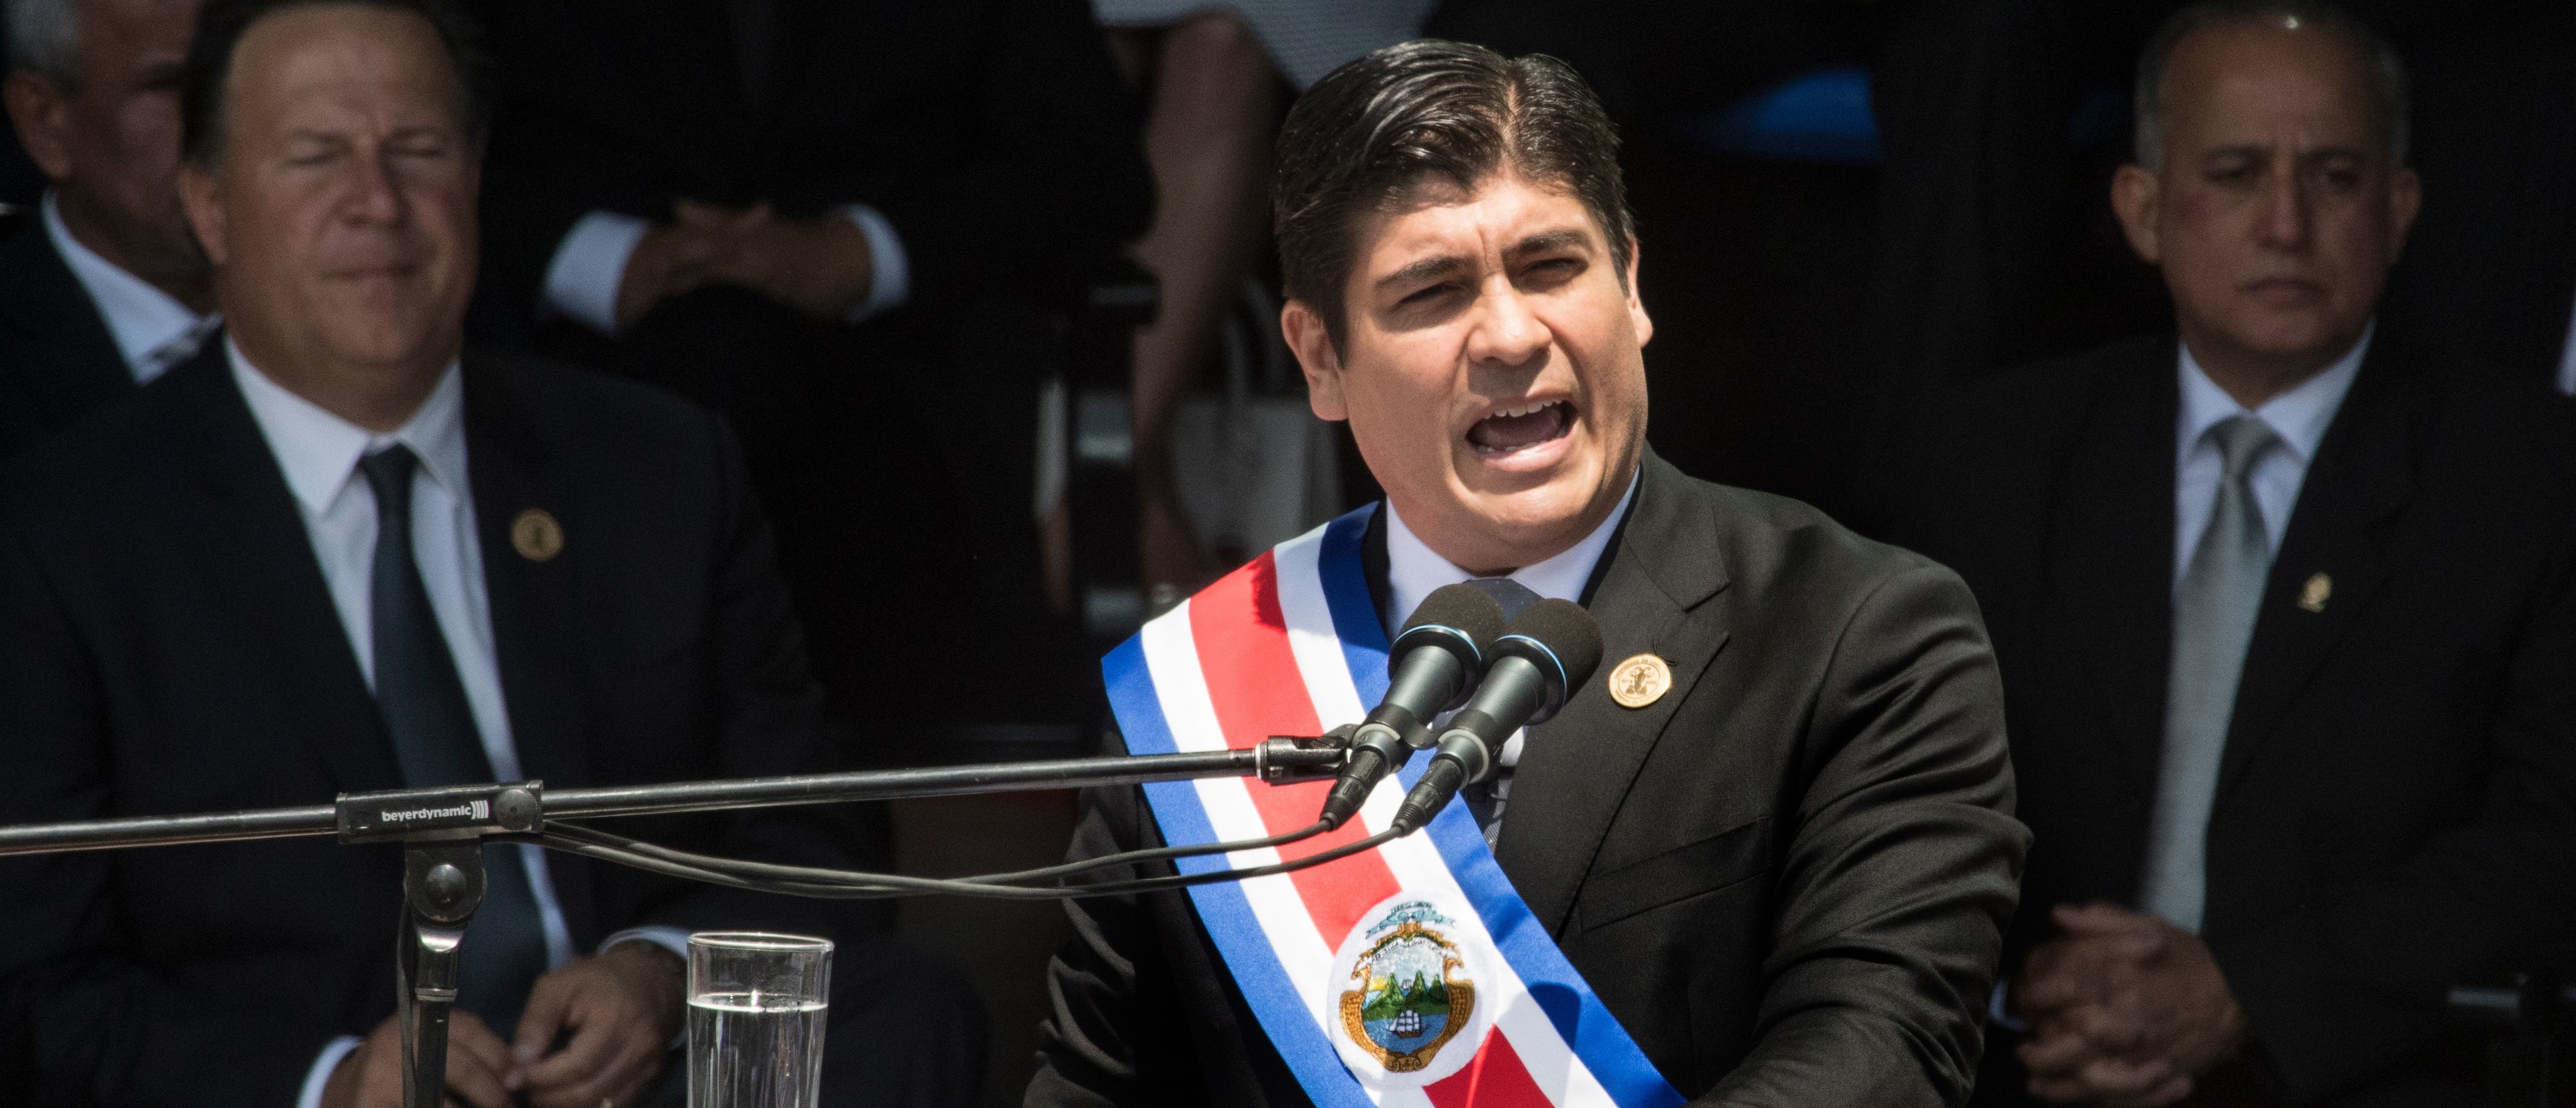 Costa Rican President-elect Carlos Alvarado speaks during his inauguration ceremony in San Jose, on May 08, 2018. - Costa Rica sworn in its new president on Tuesday, at the head of a multi-party government facing challenges from climbing crime, looming migration, and an growing deficit. (Photo by Ezequiel BECERRA / AFP) (Photo credit should read EZEQUIEL BECERRA/AFP via Getty Images)